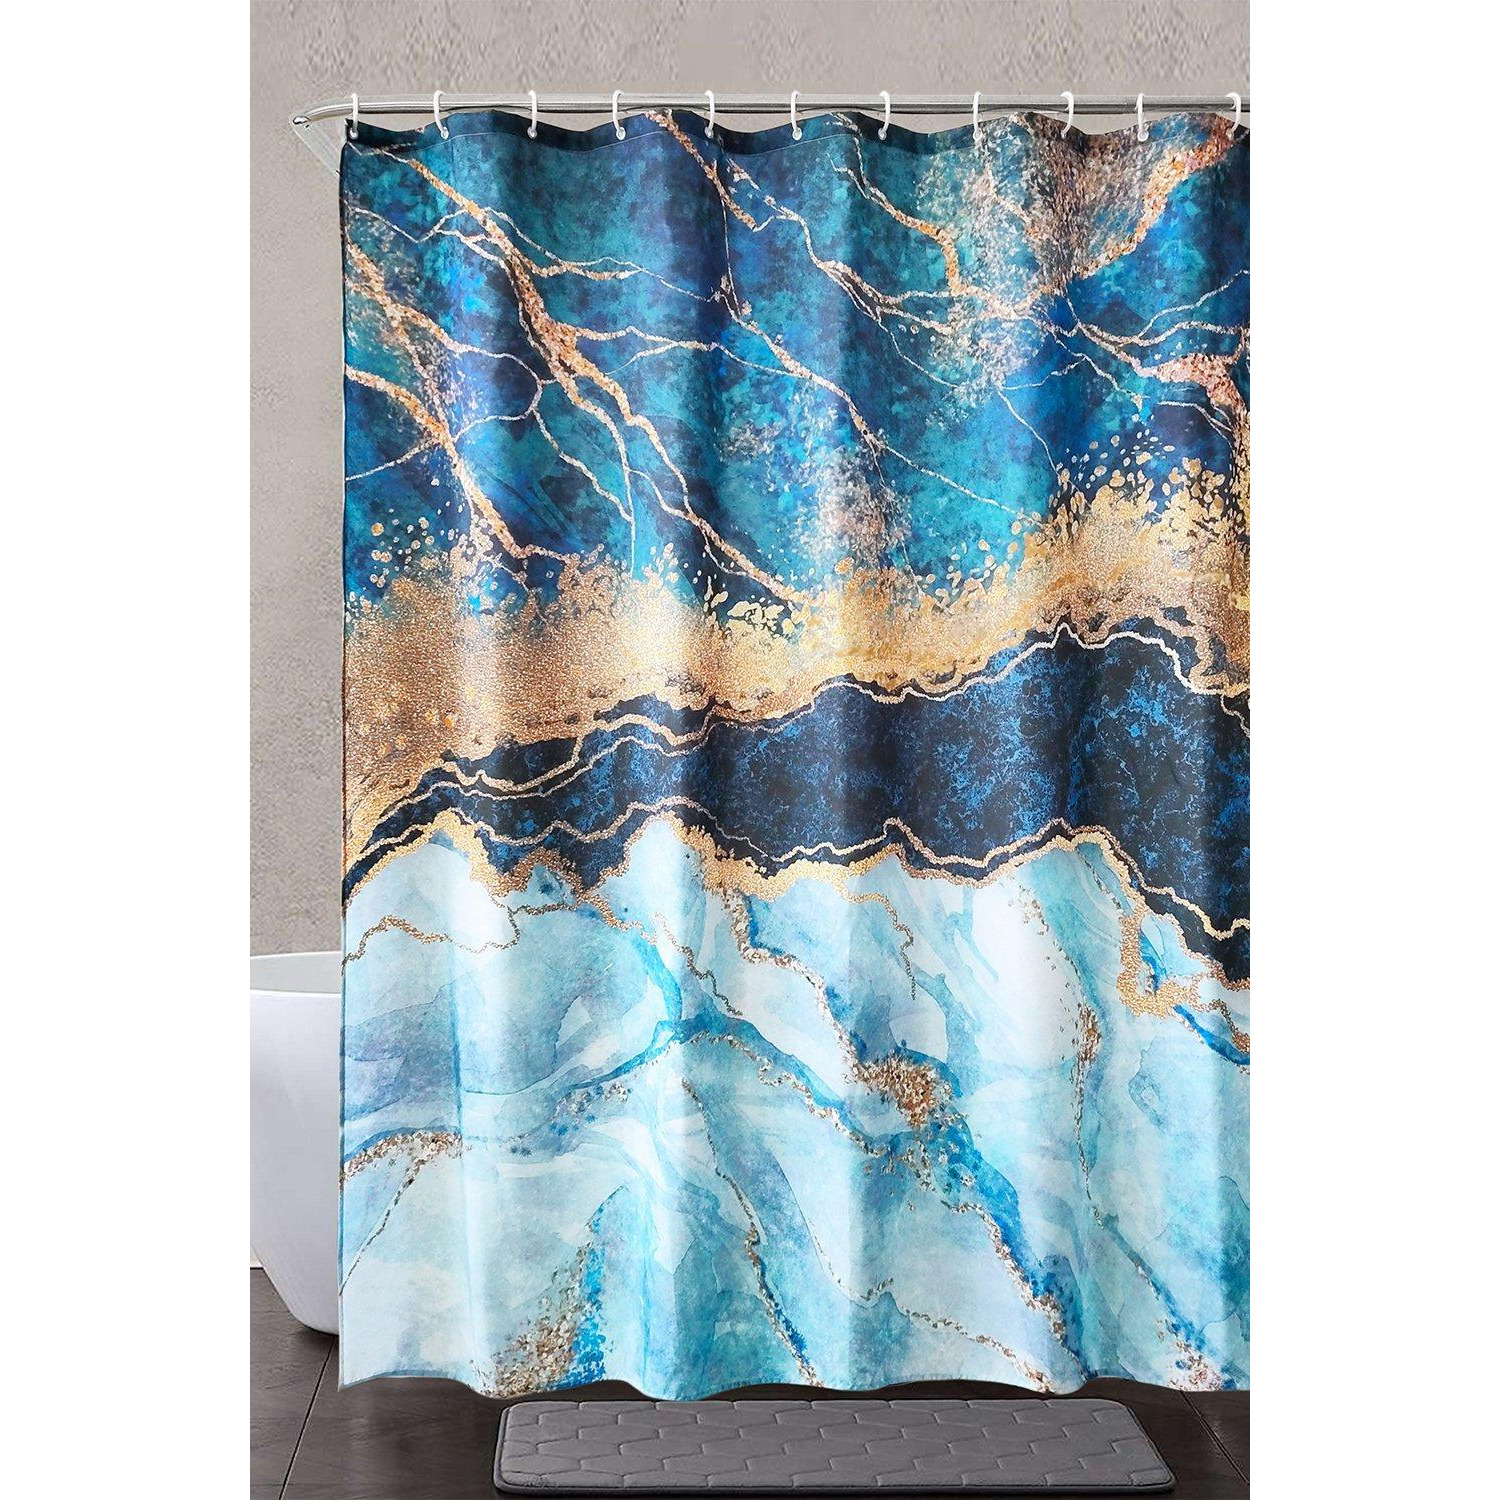 Abstract Blue Shower Curtain, Gold Cracked Lines - 180cm x 200cm - image 1